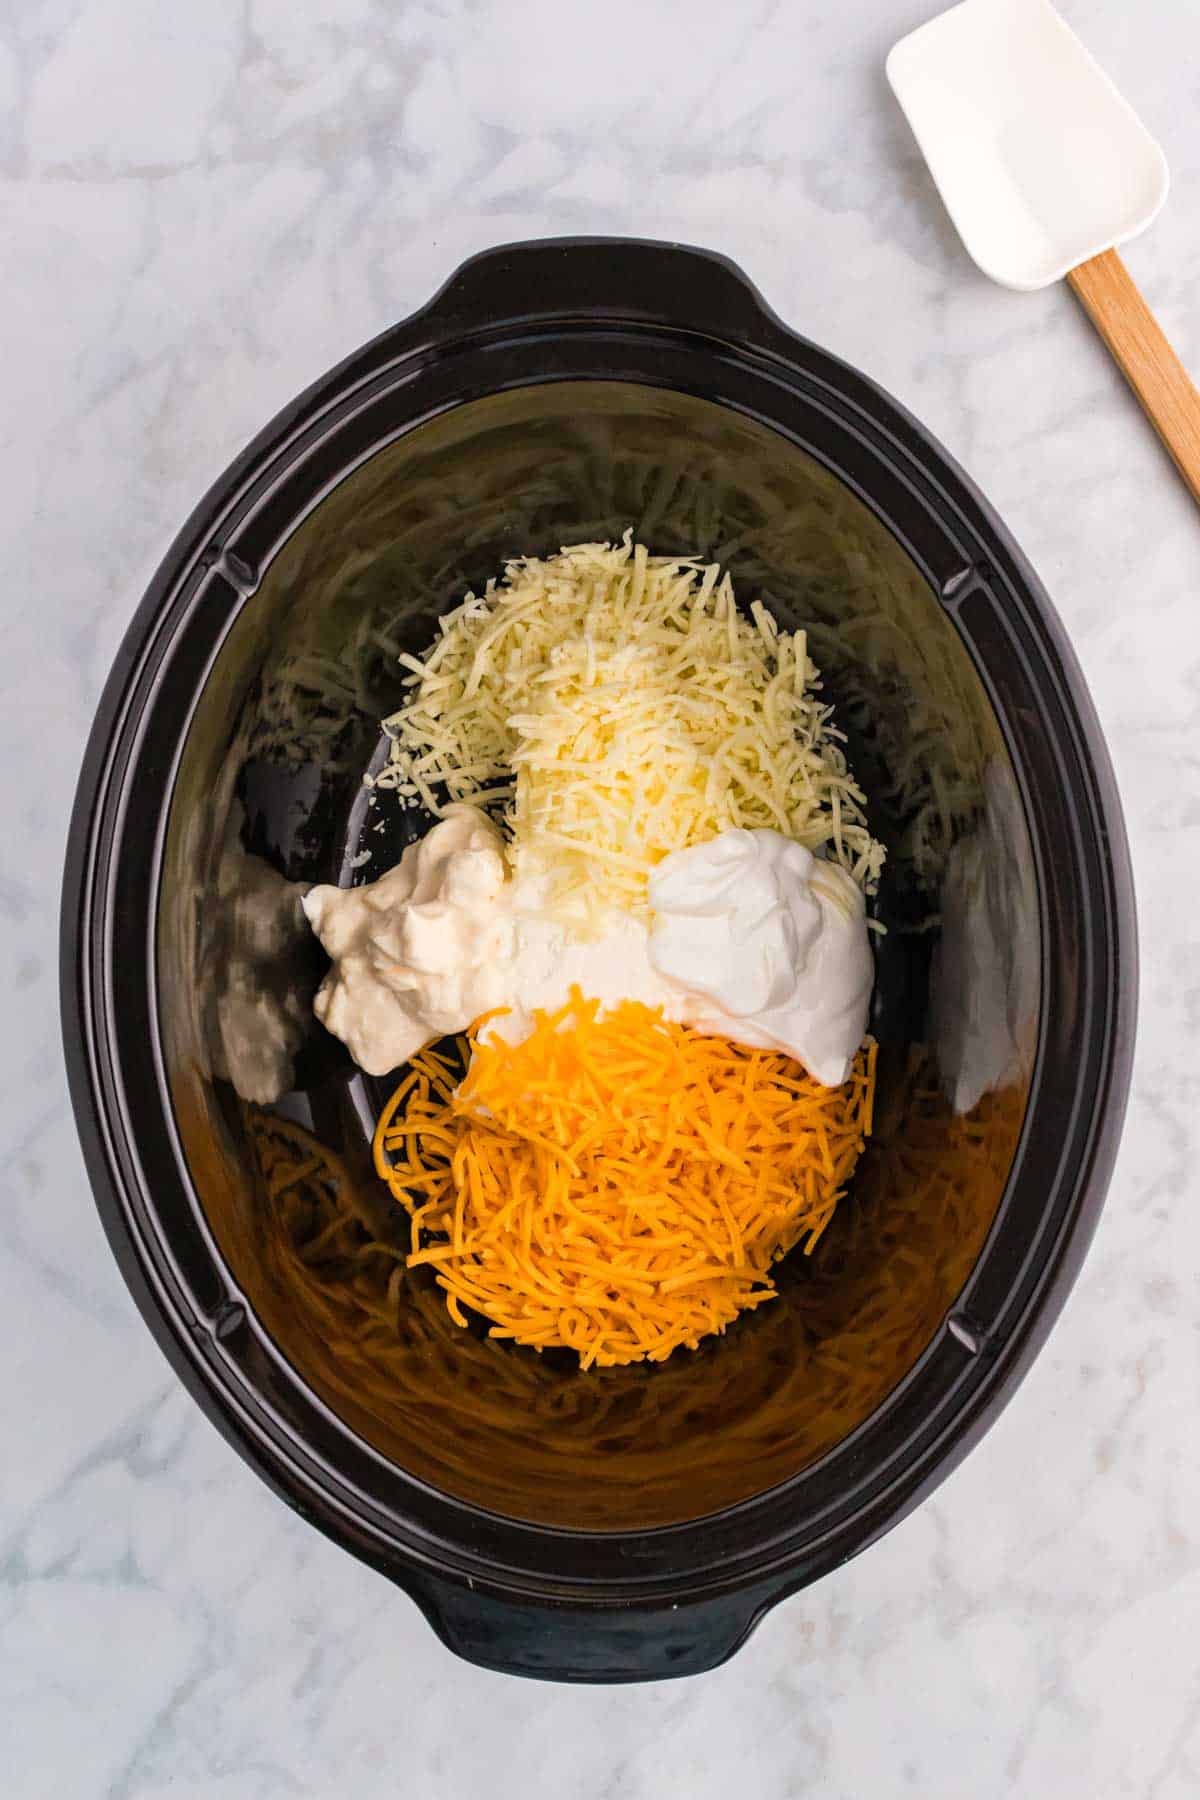 shredded cheddar, Monterey jack, sour cream, mayo and cream cheese in a Crock Pot